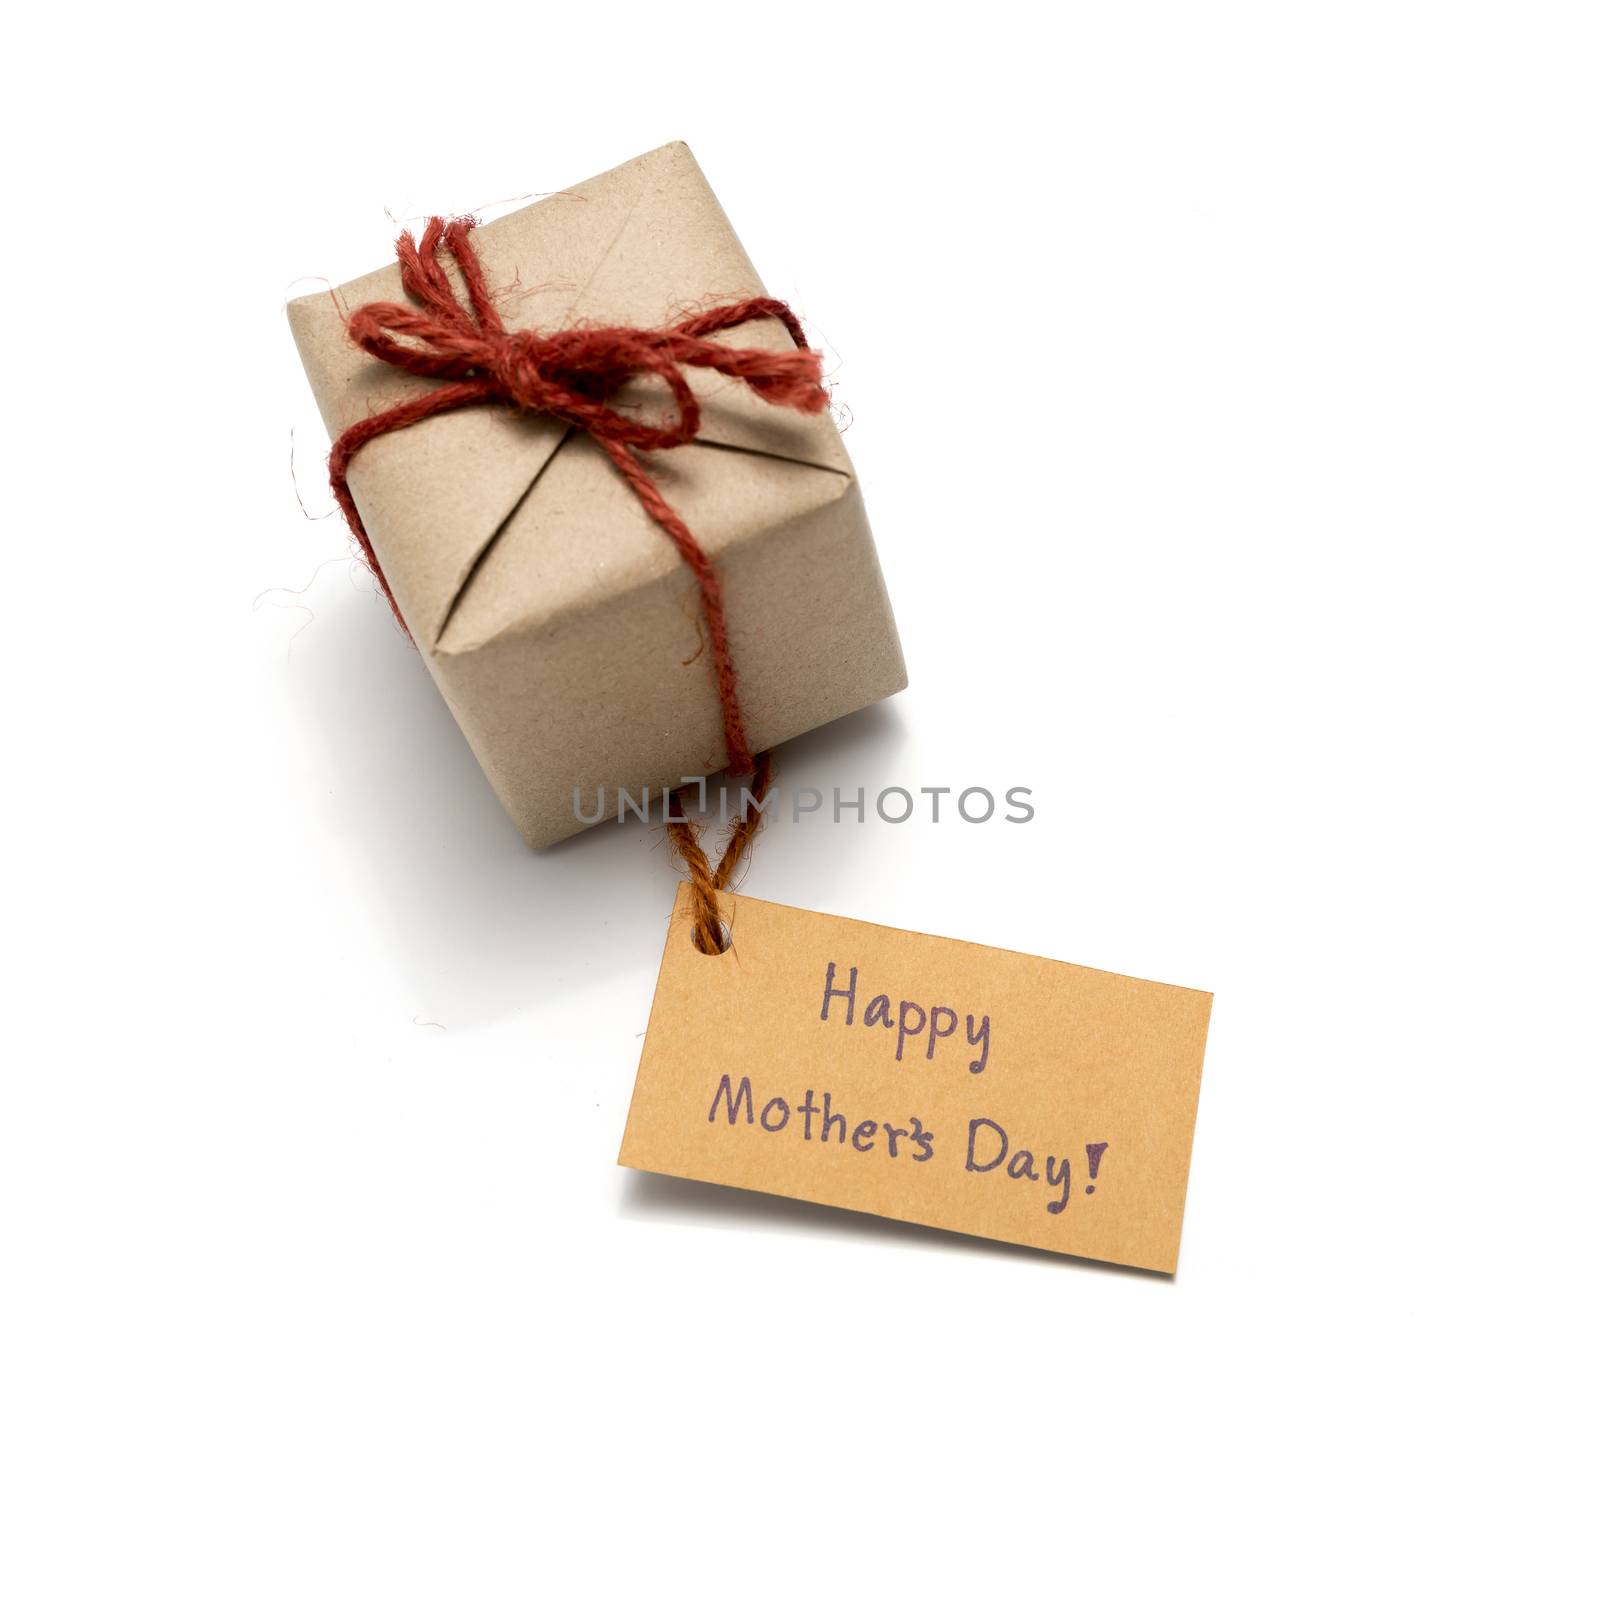 happy mother's day card and gift box isolated on white background